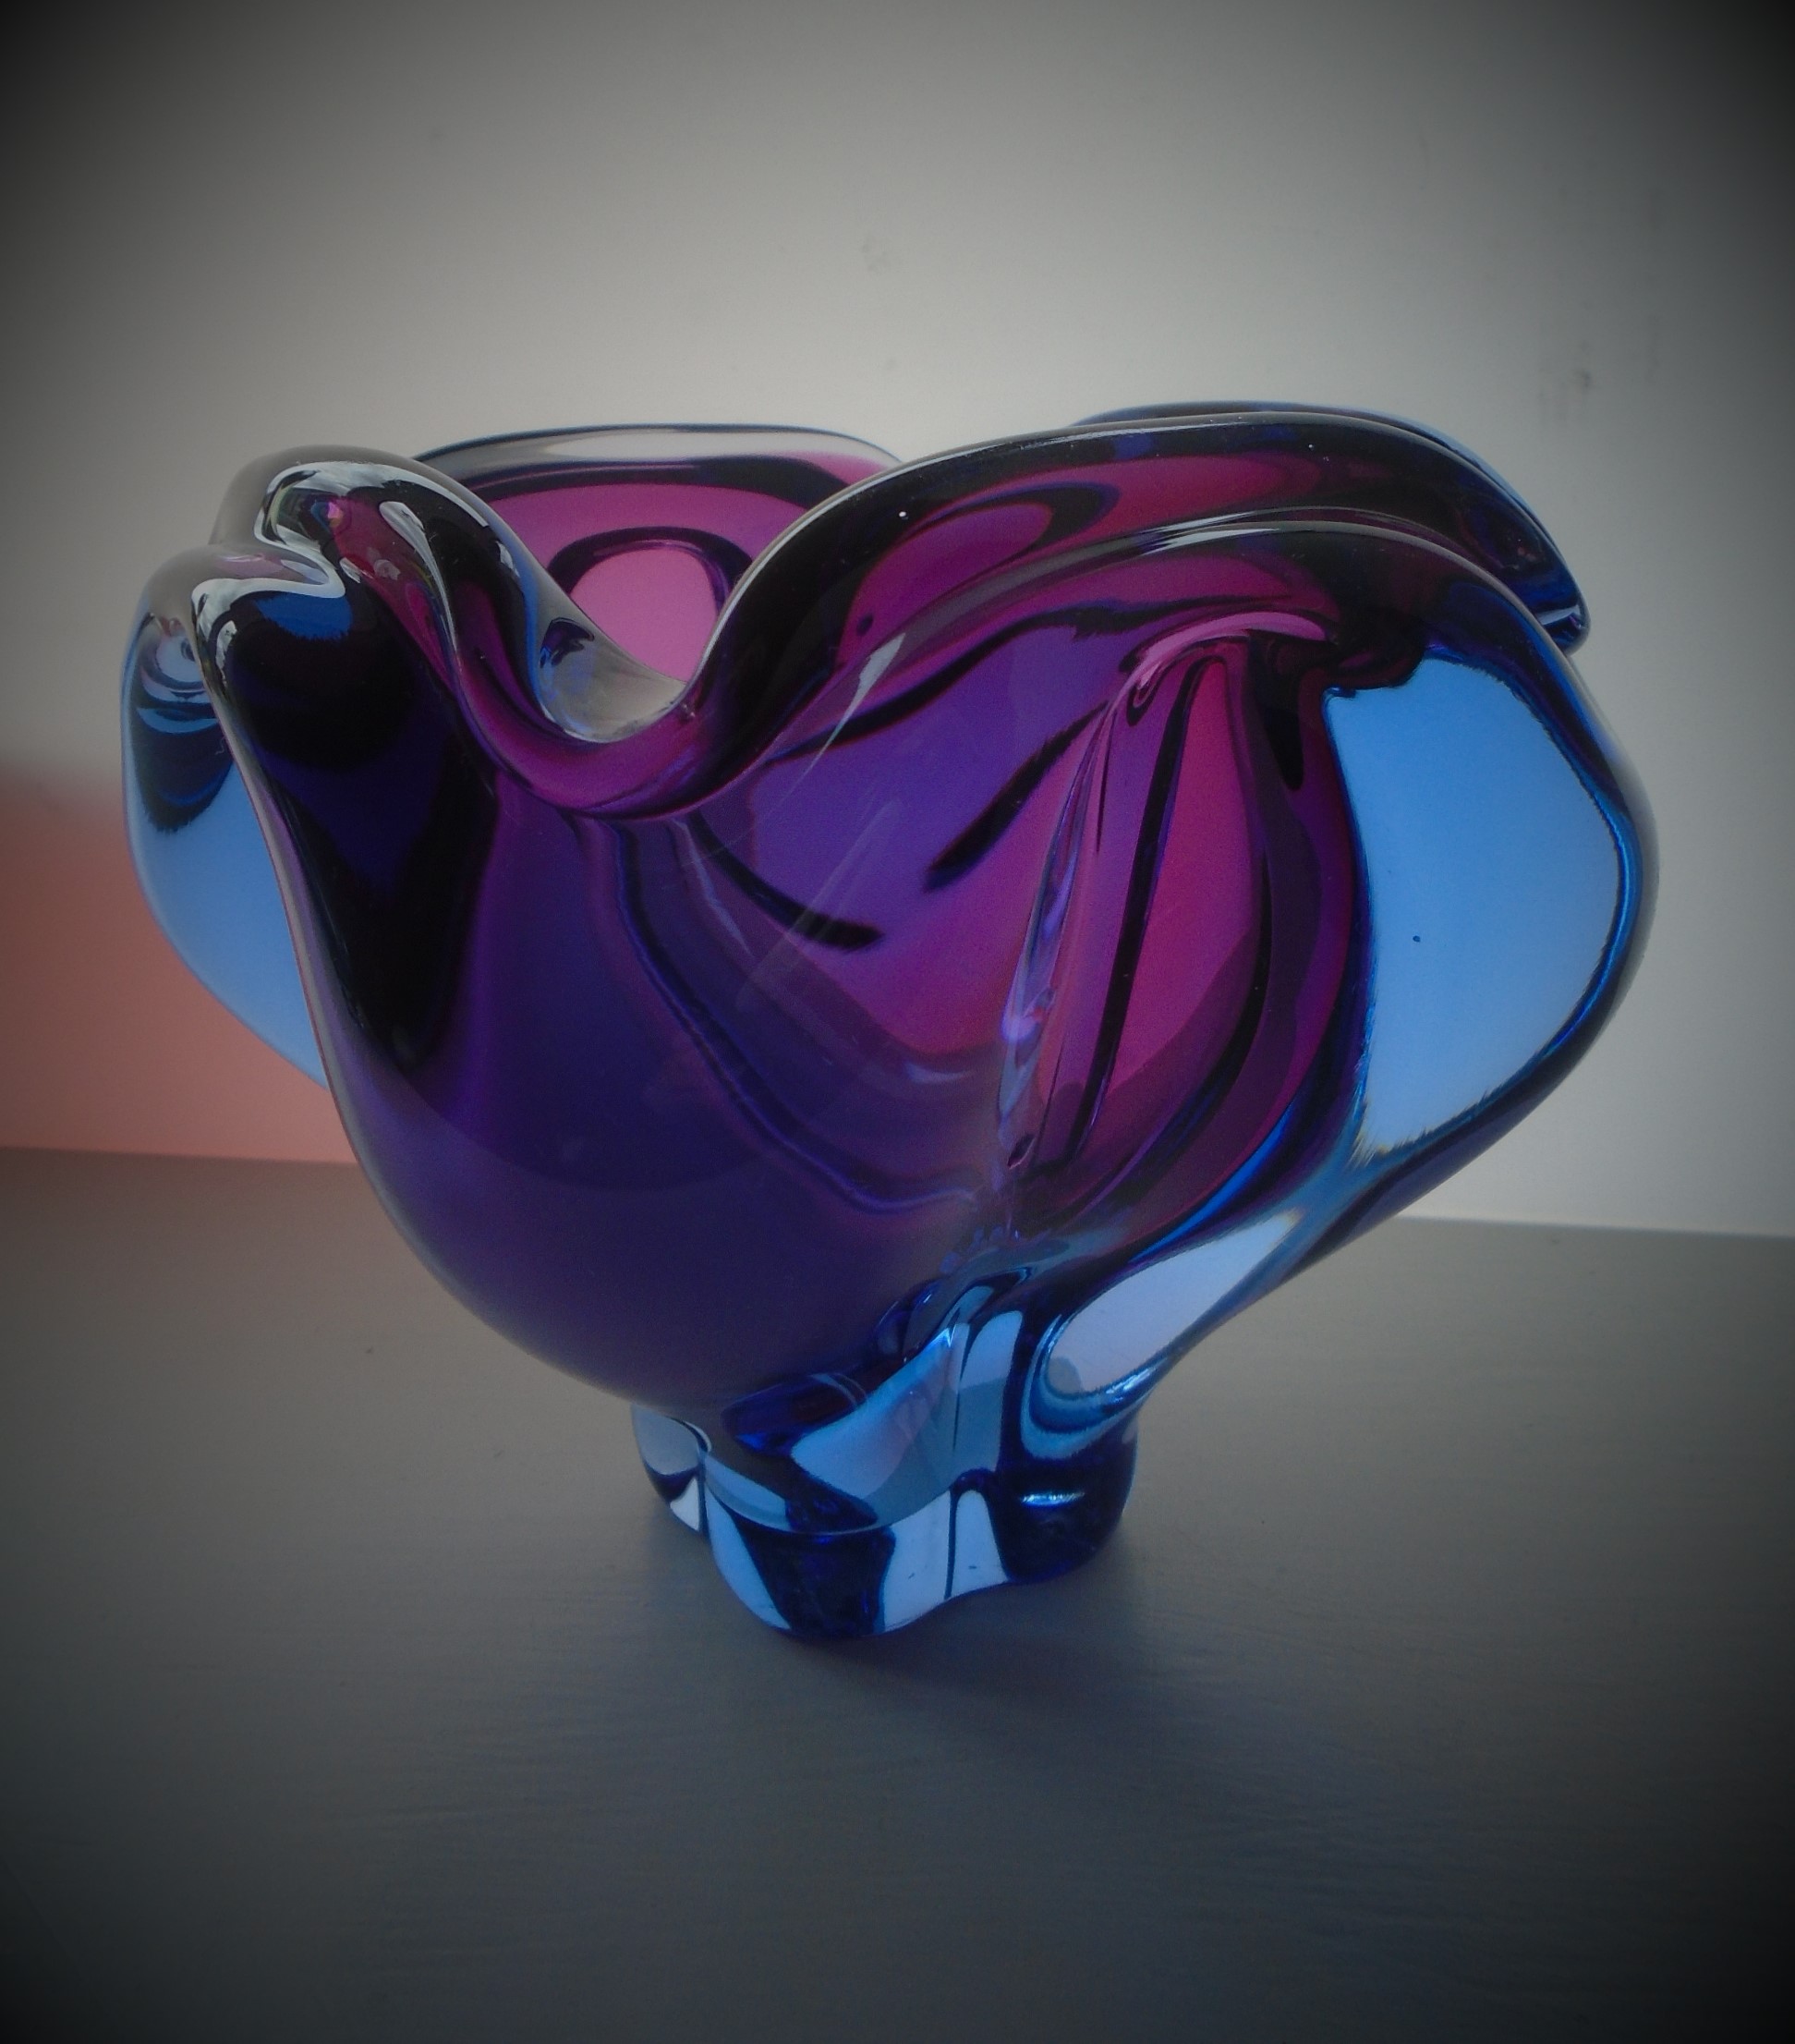 Offered for sale is what I believe to be a stunning   60S VINTAGE PURPLE AND BLUE GLASS BOWL FROM CZECH MAKER CHRIBSKA AND POSSIBLE DESIGNED BY JOSEPH HOSPODKA. 